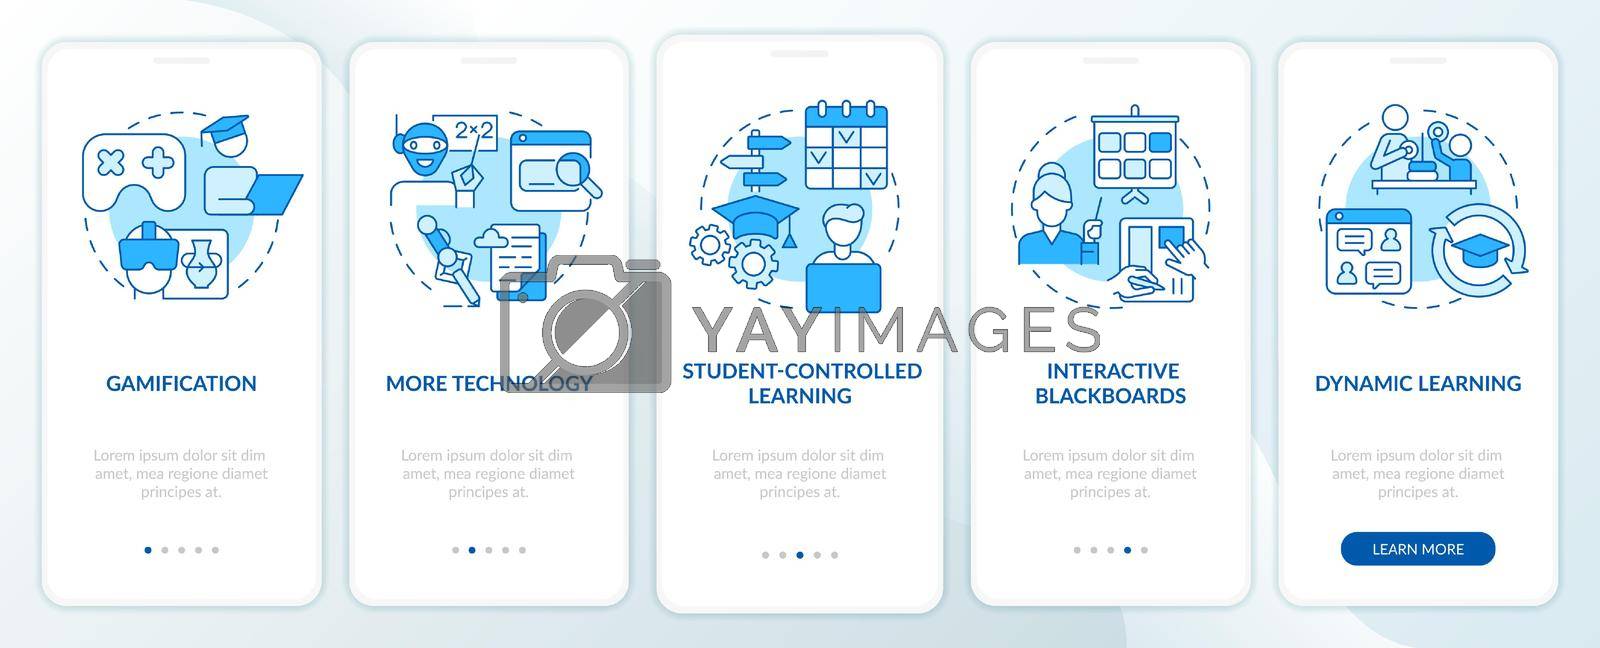 Technology in education trends blue onboarding mobile app screen. Digital walkthrough 5 steps graphic instructions pages with linear concepts. UI, UX, GUI template. Myriad Pro-Bold, Regular fonts used